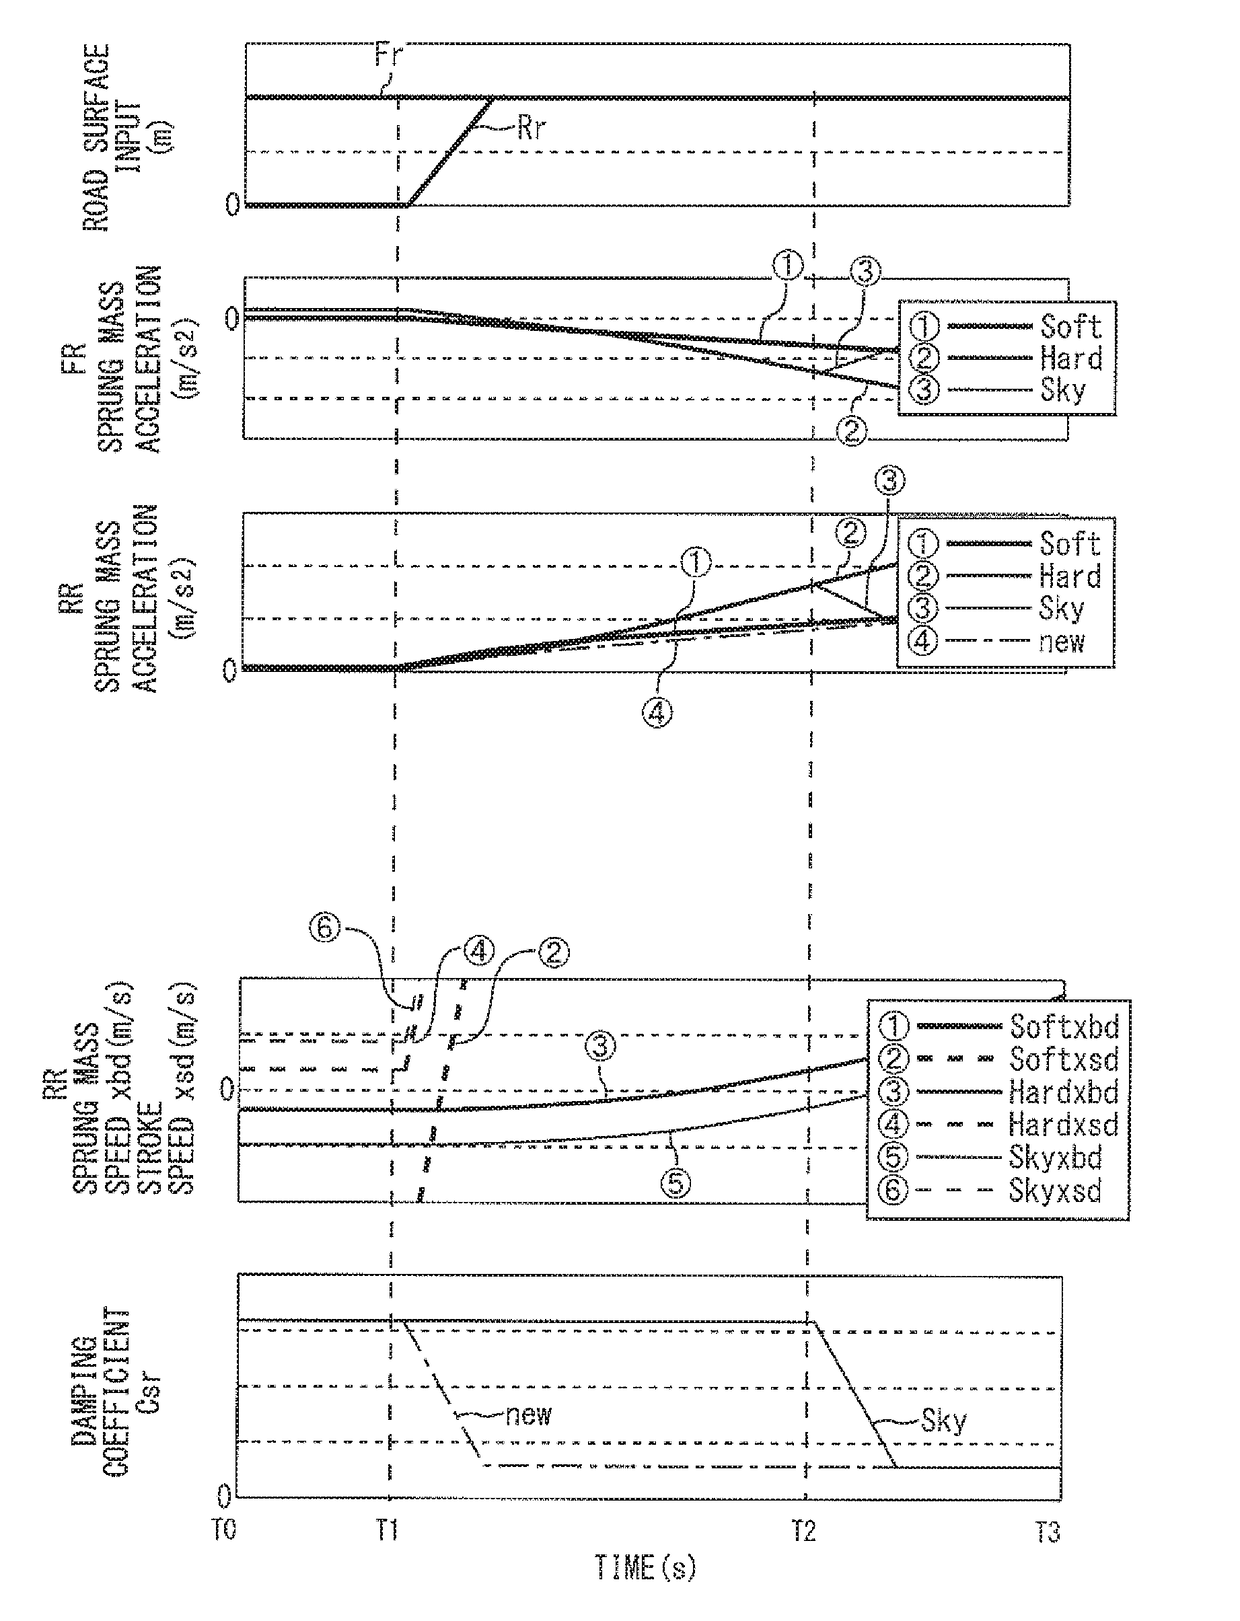 Control device for vehicle suspension